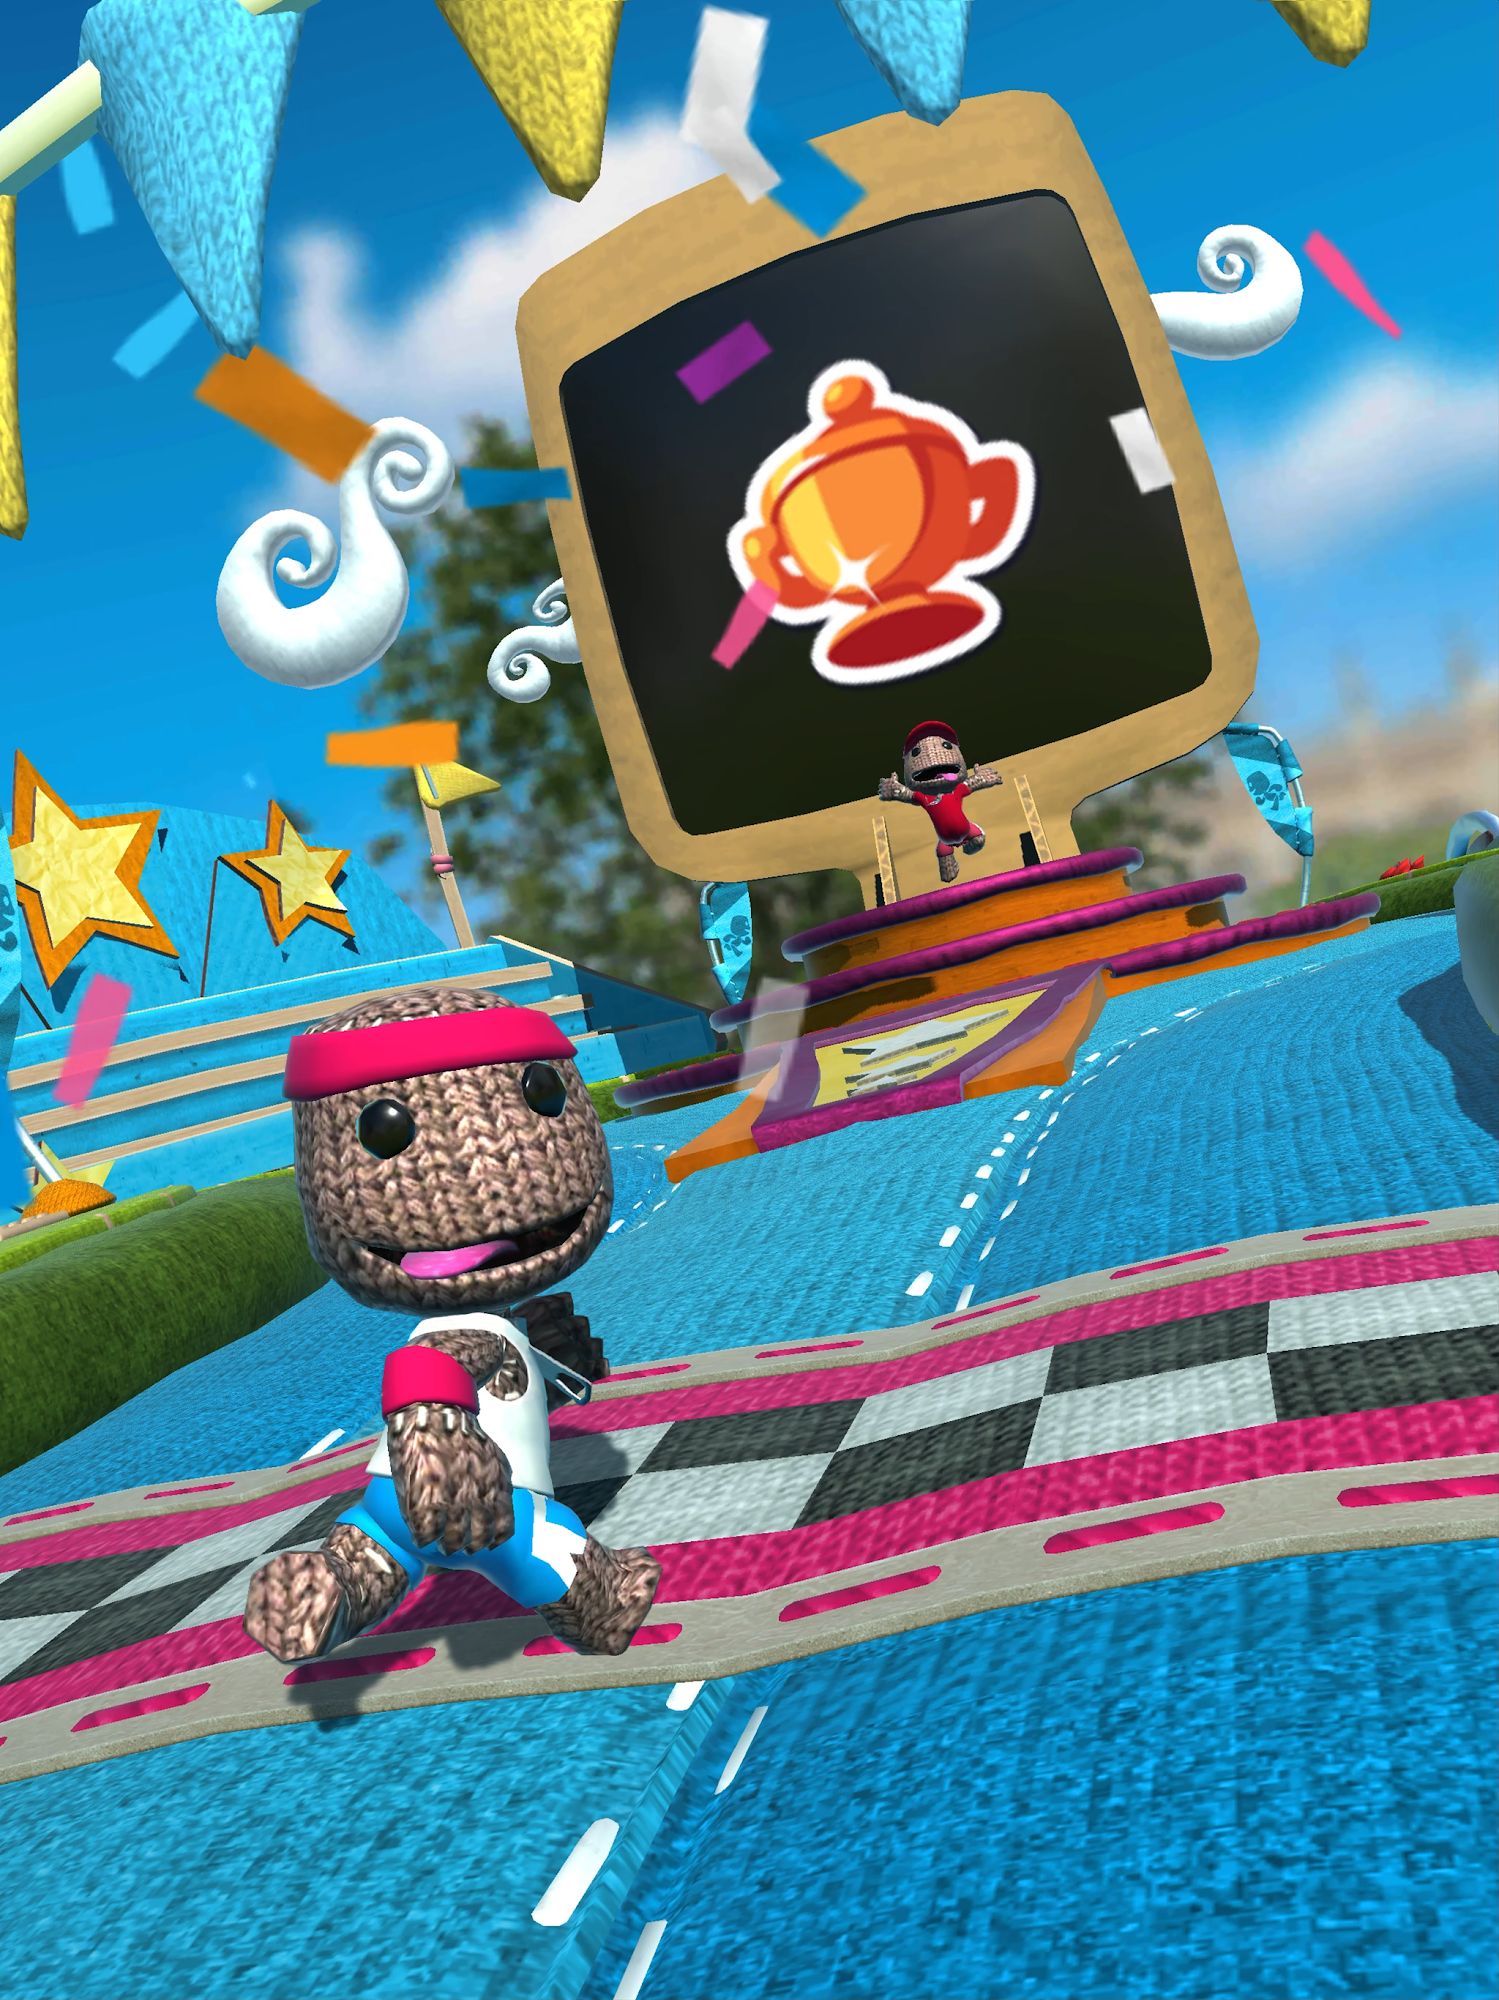 Ultimate Sackboy for Android